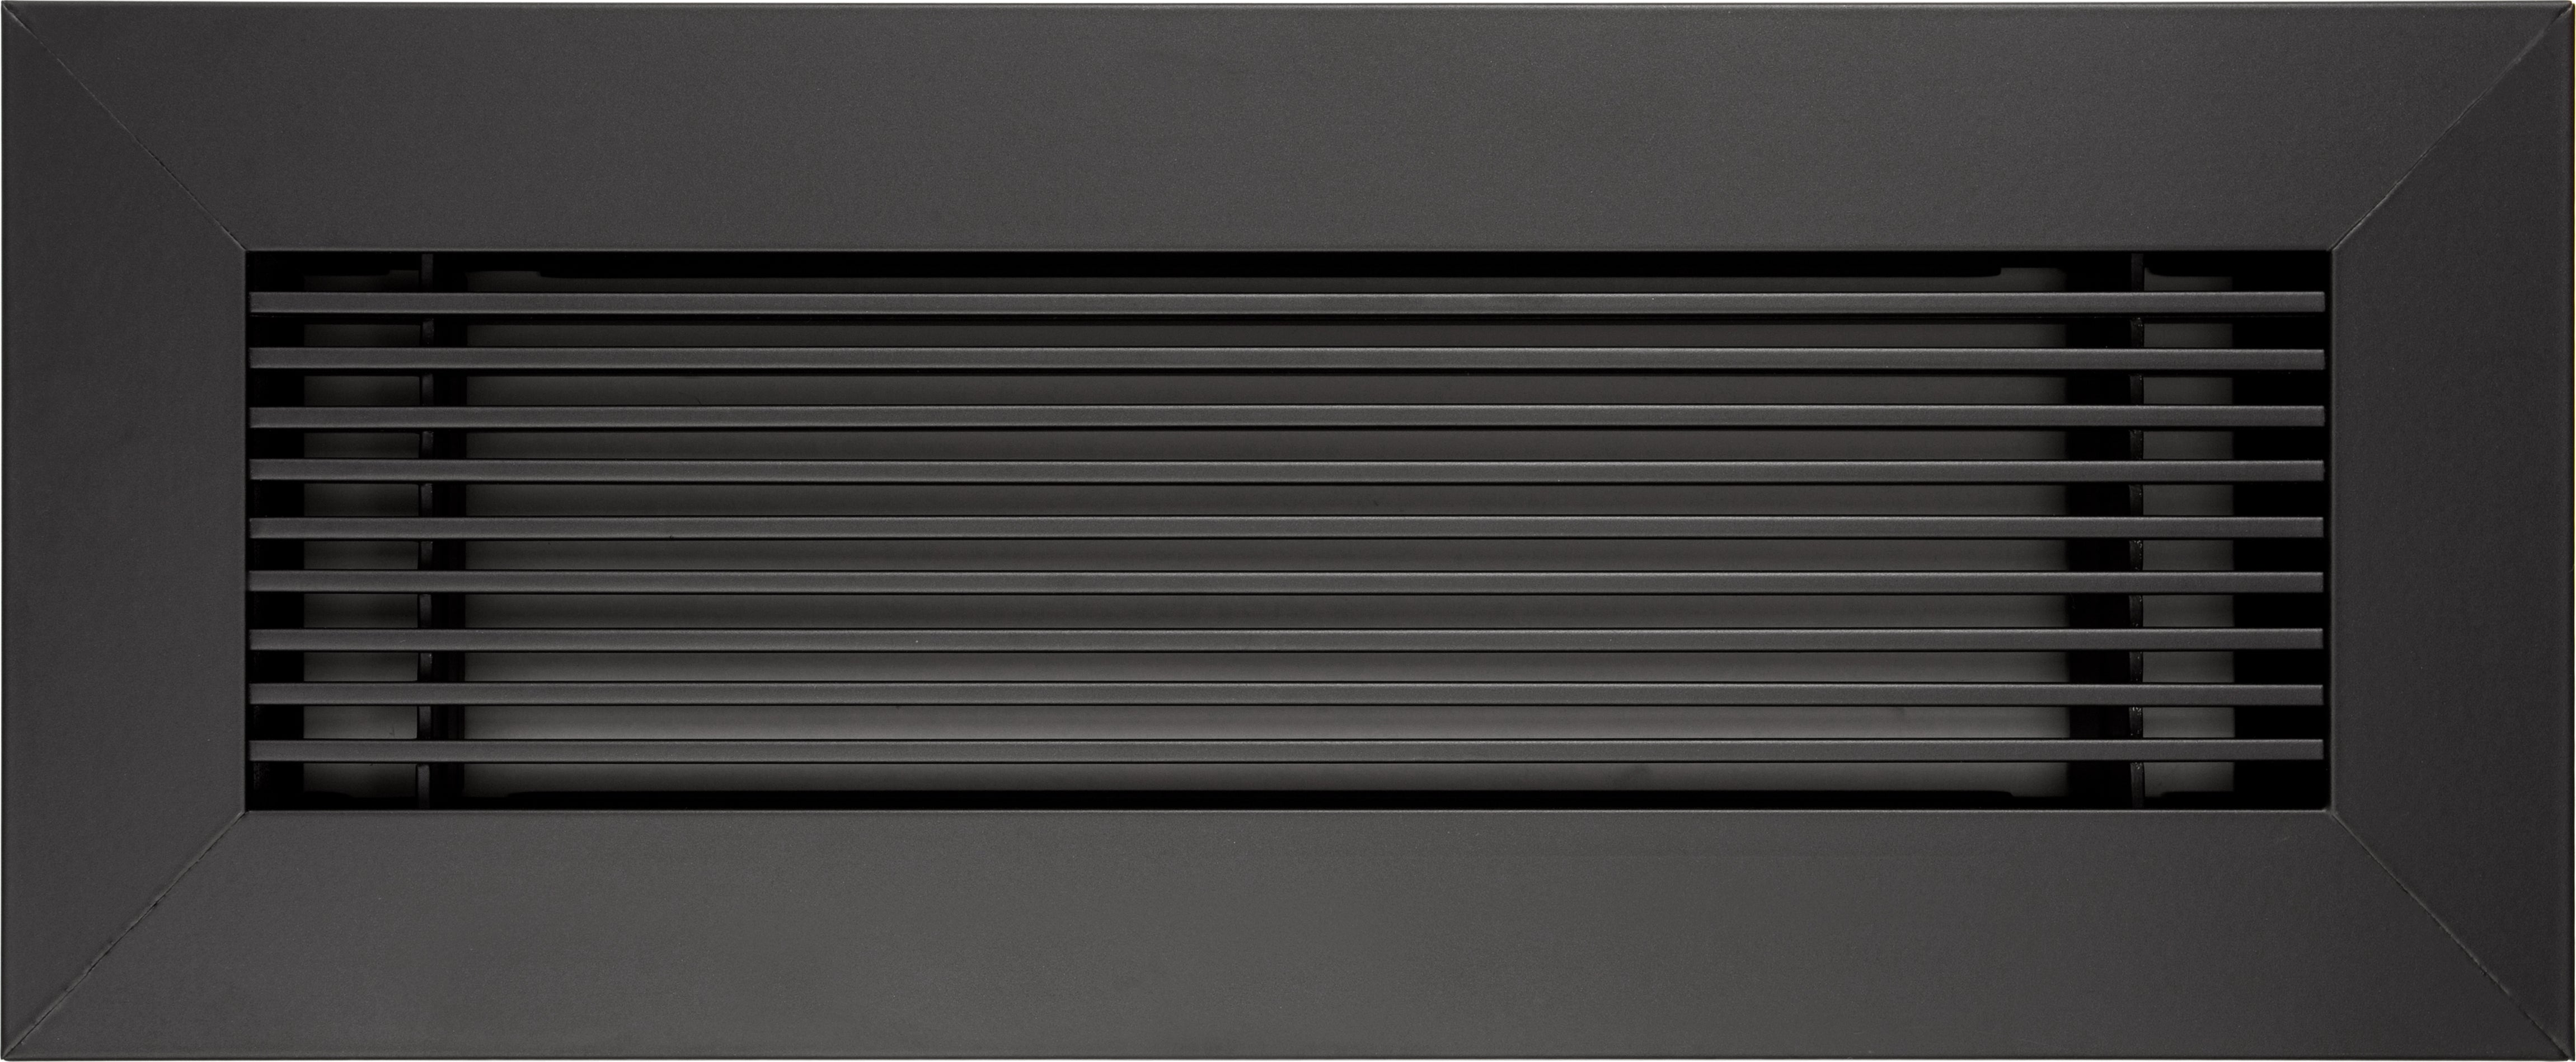 vent cover product picture Black Monolith finish No Holes by kul grilles